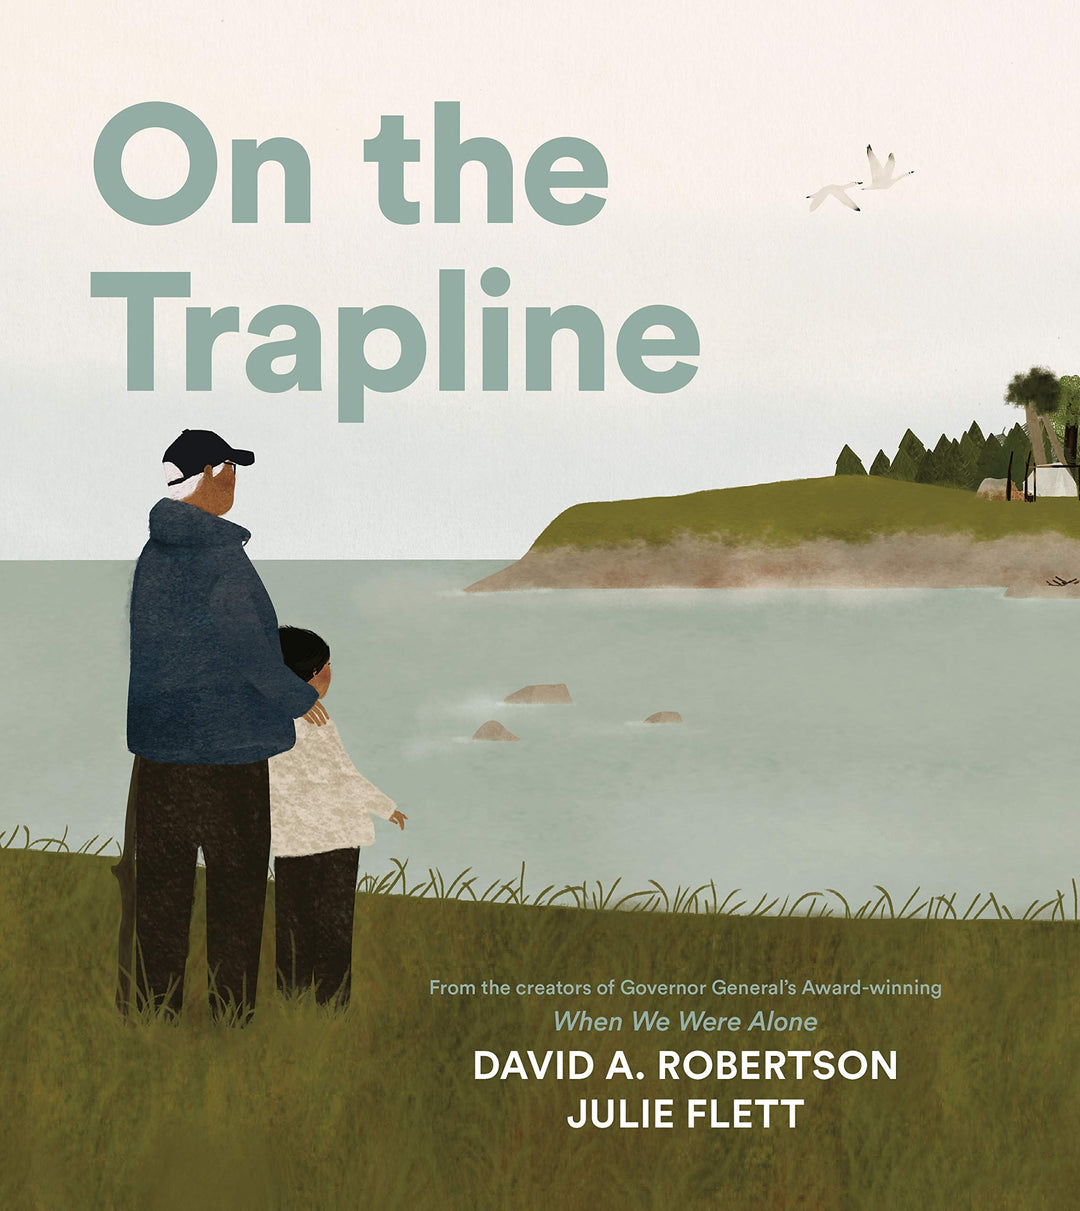 On the Trapline by David A. Robertson